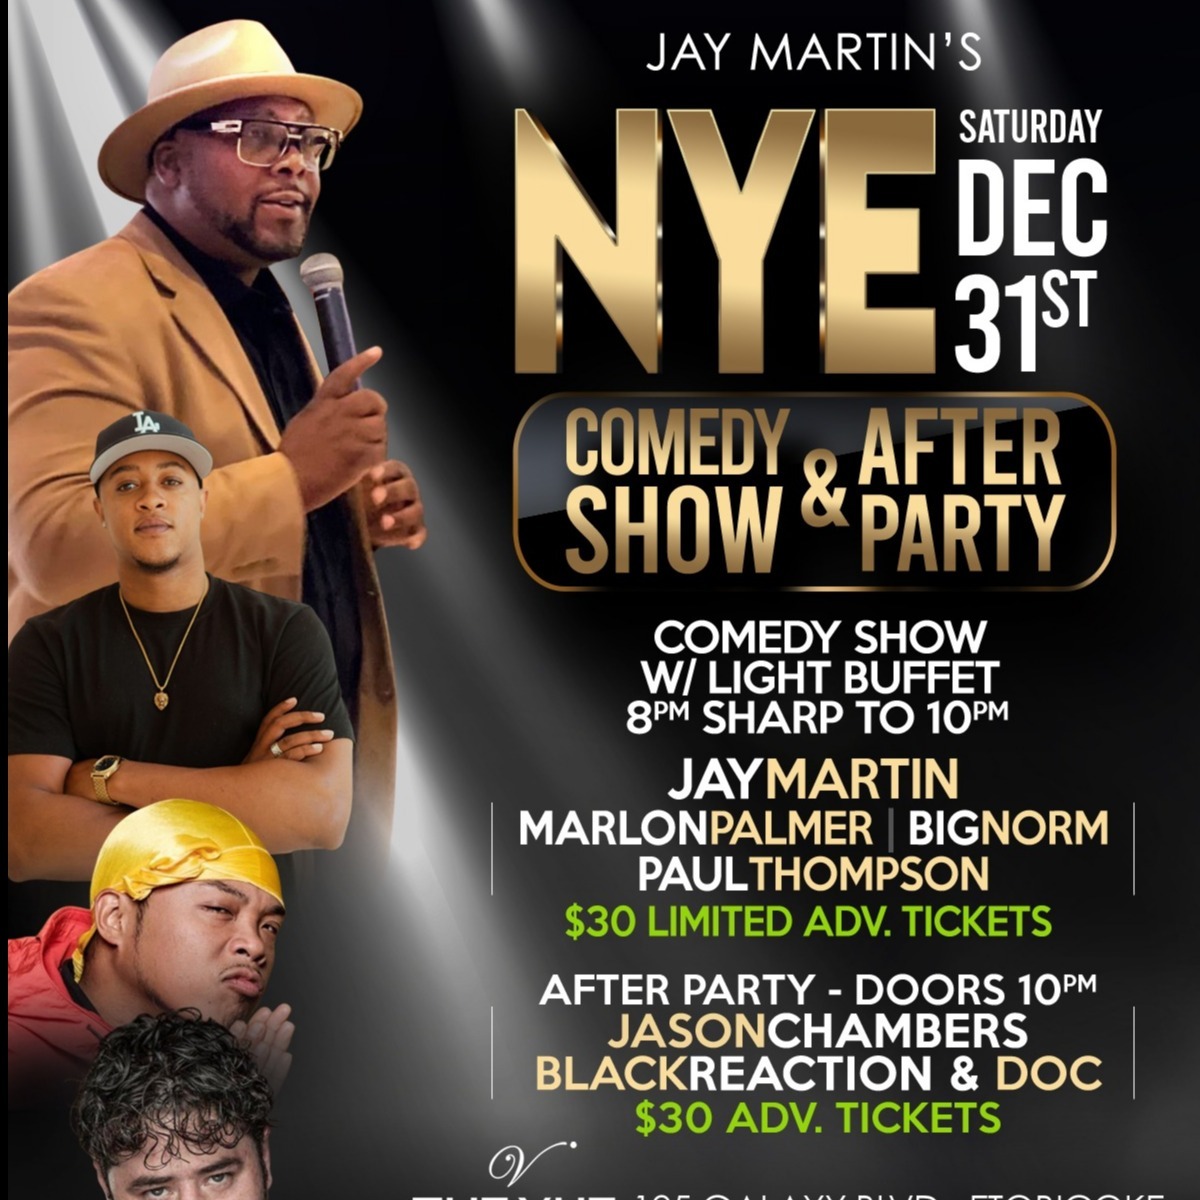 Jay Martin's NYE Comedy Show and After Party